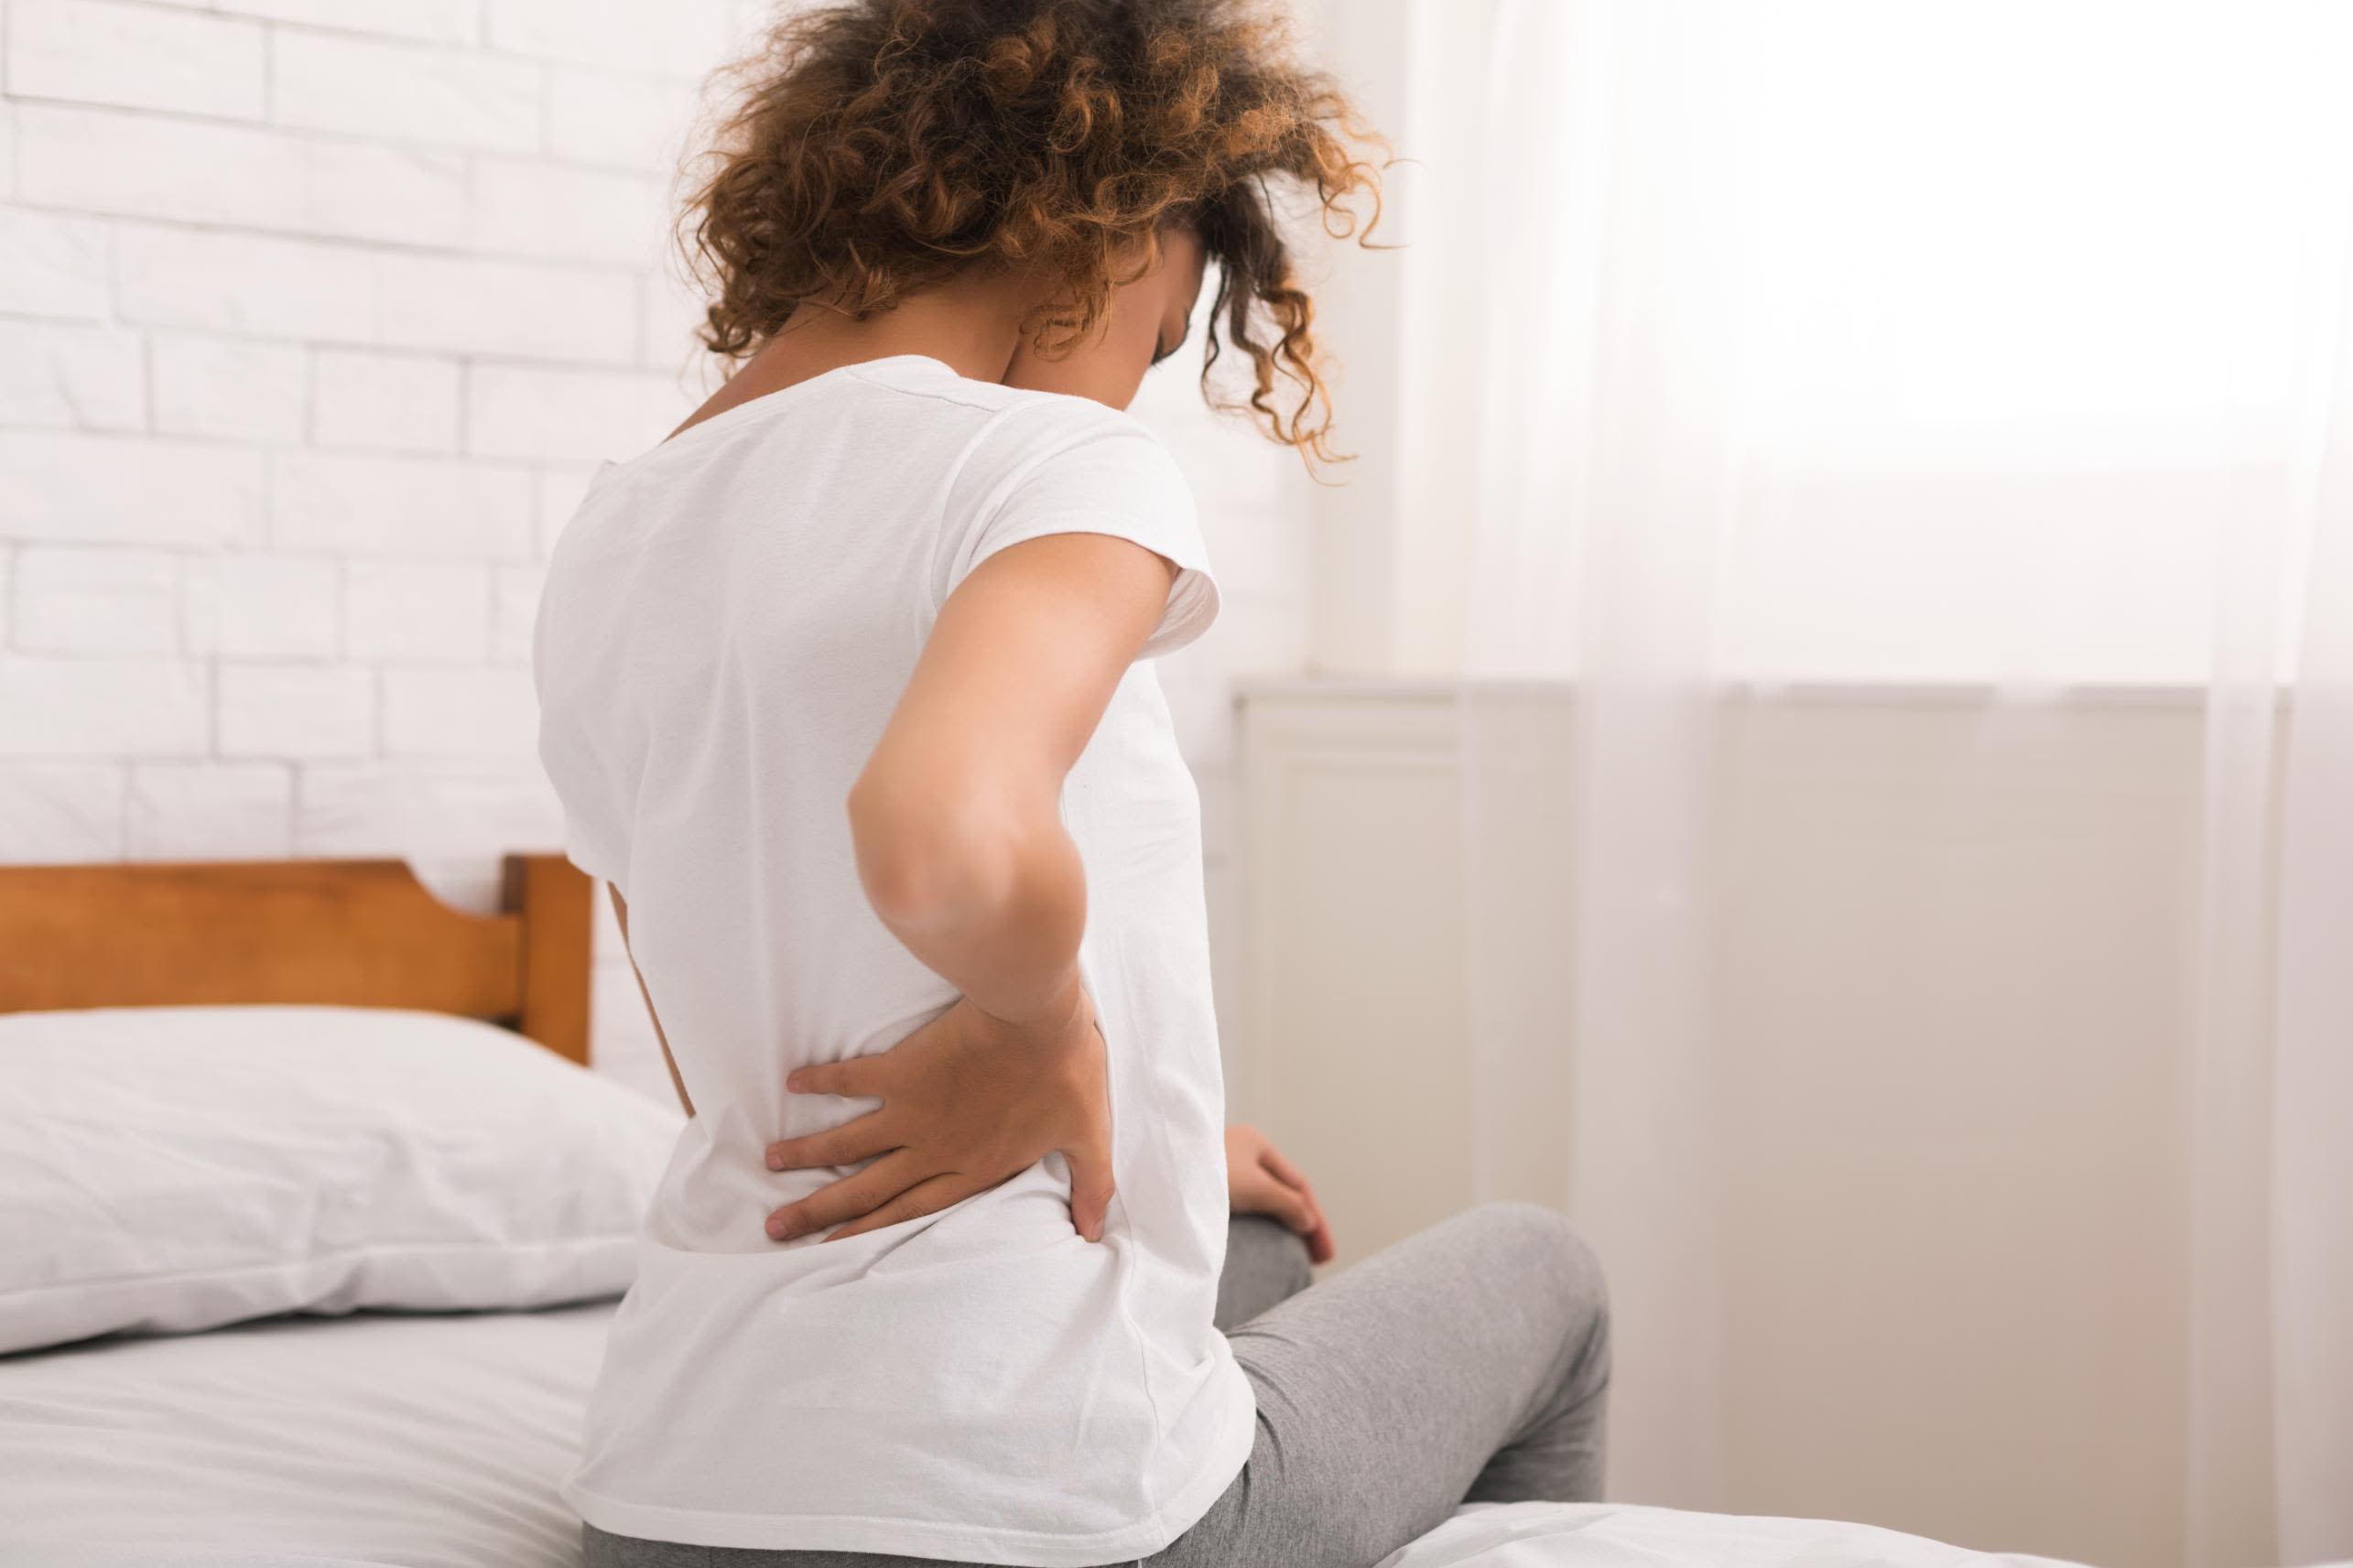 14 Best Treatments for Lower Back Pain Relief, According to Doctors